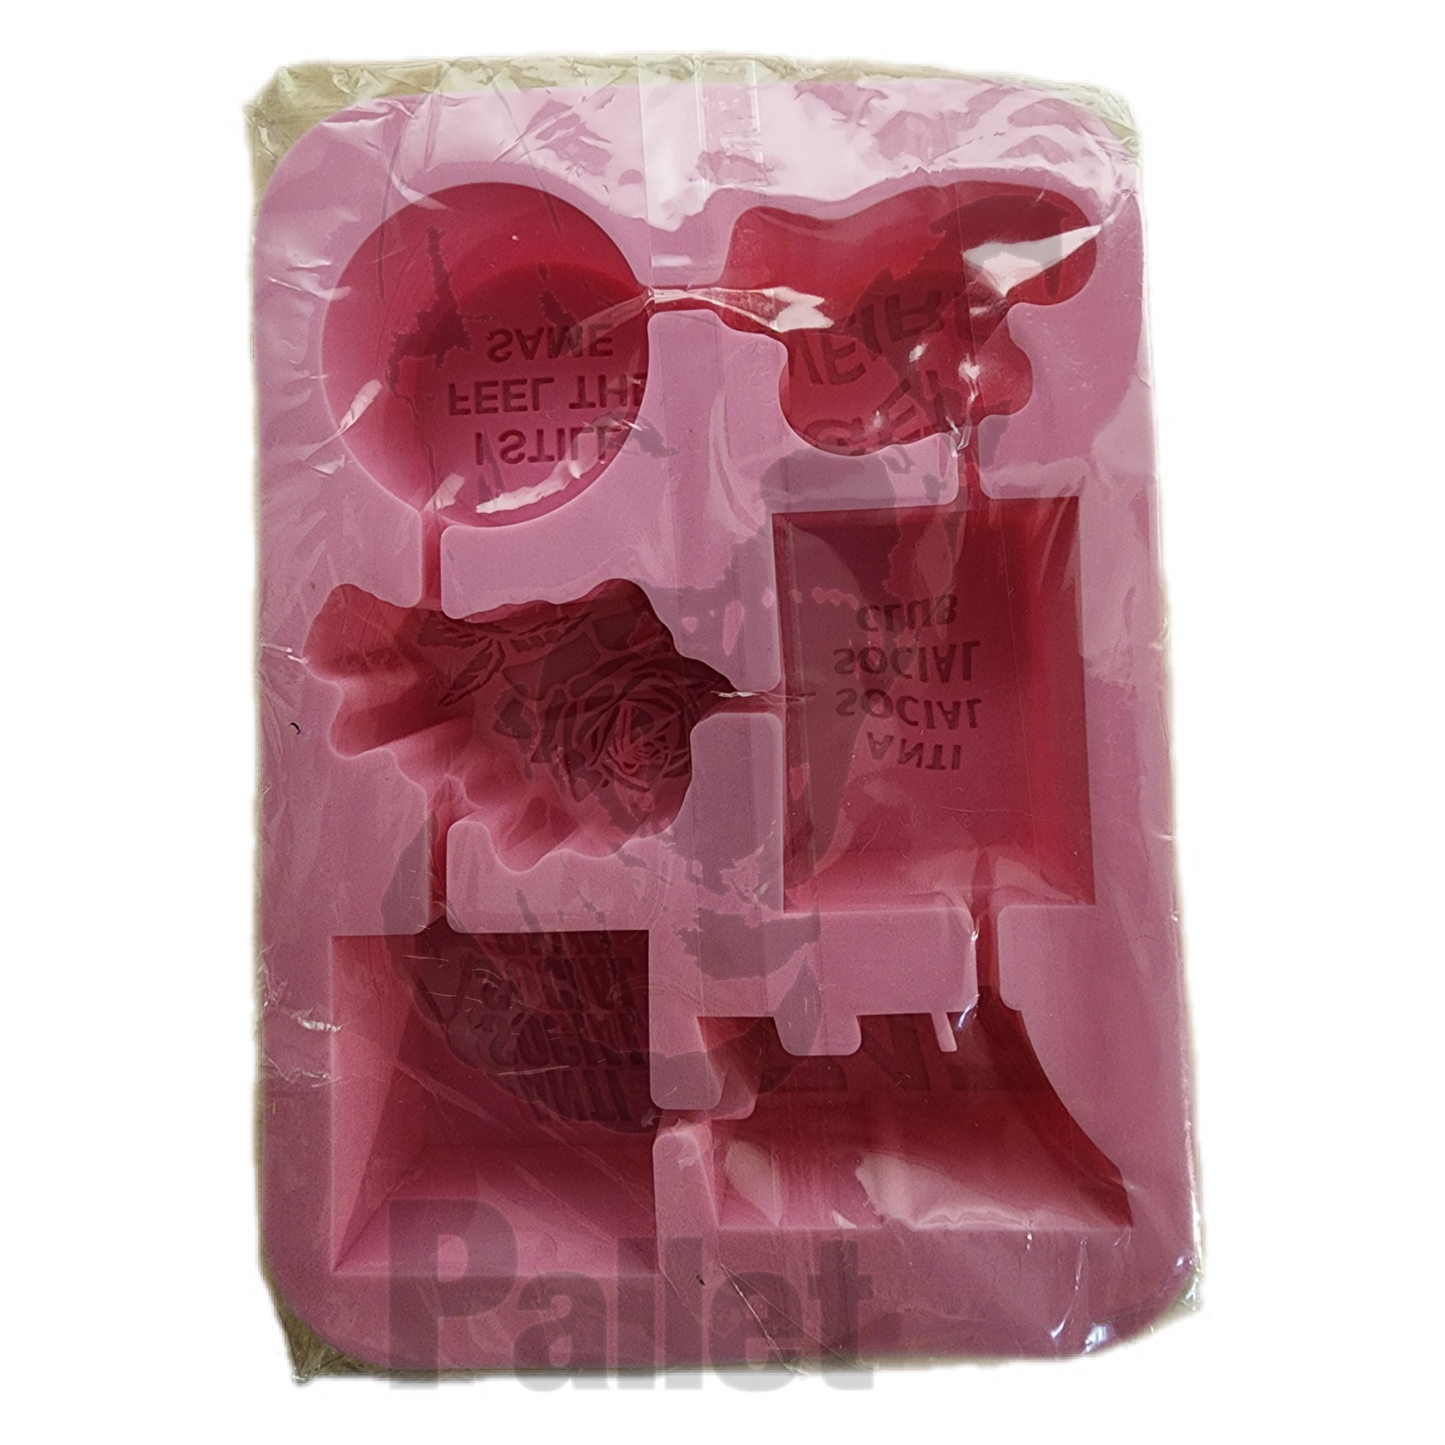 ASSC - "Ice Tray"